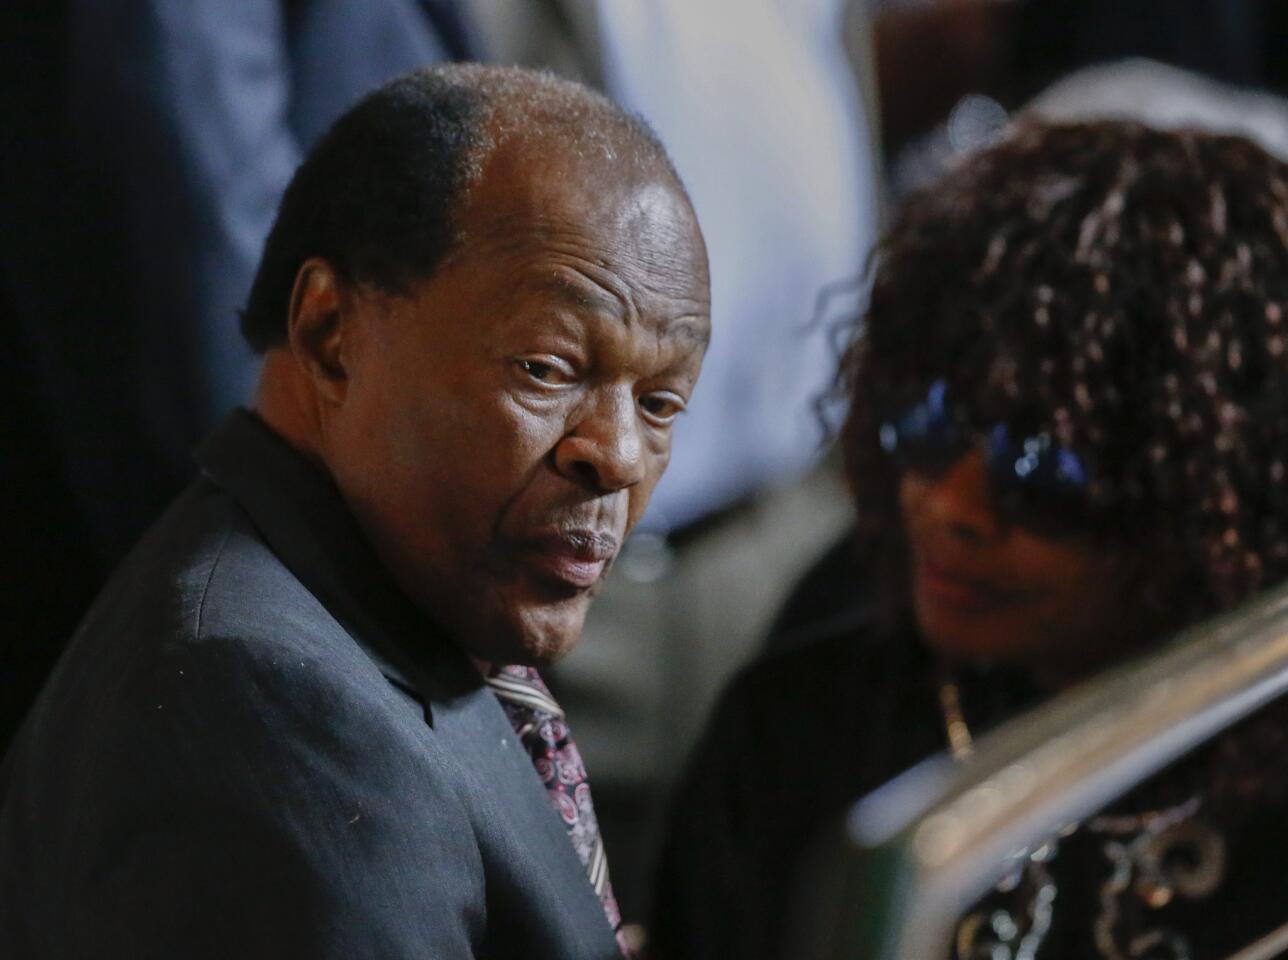 District of Columbia Councilman Marion Barry appears at a campaign rally for Georgia Democratic Senate candidate Michelle Nunn in Atlanta in October.